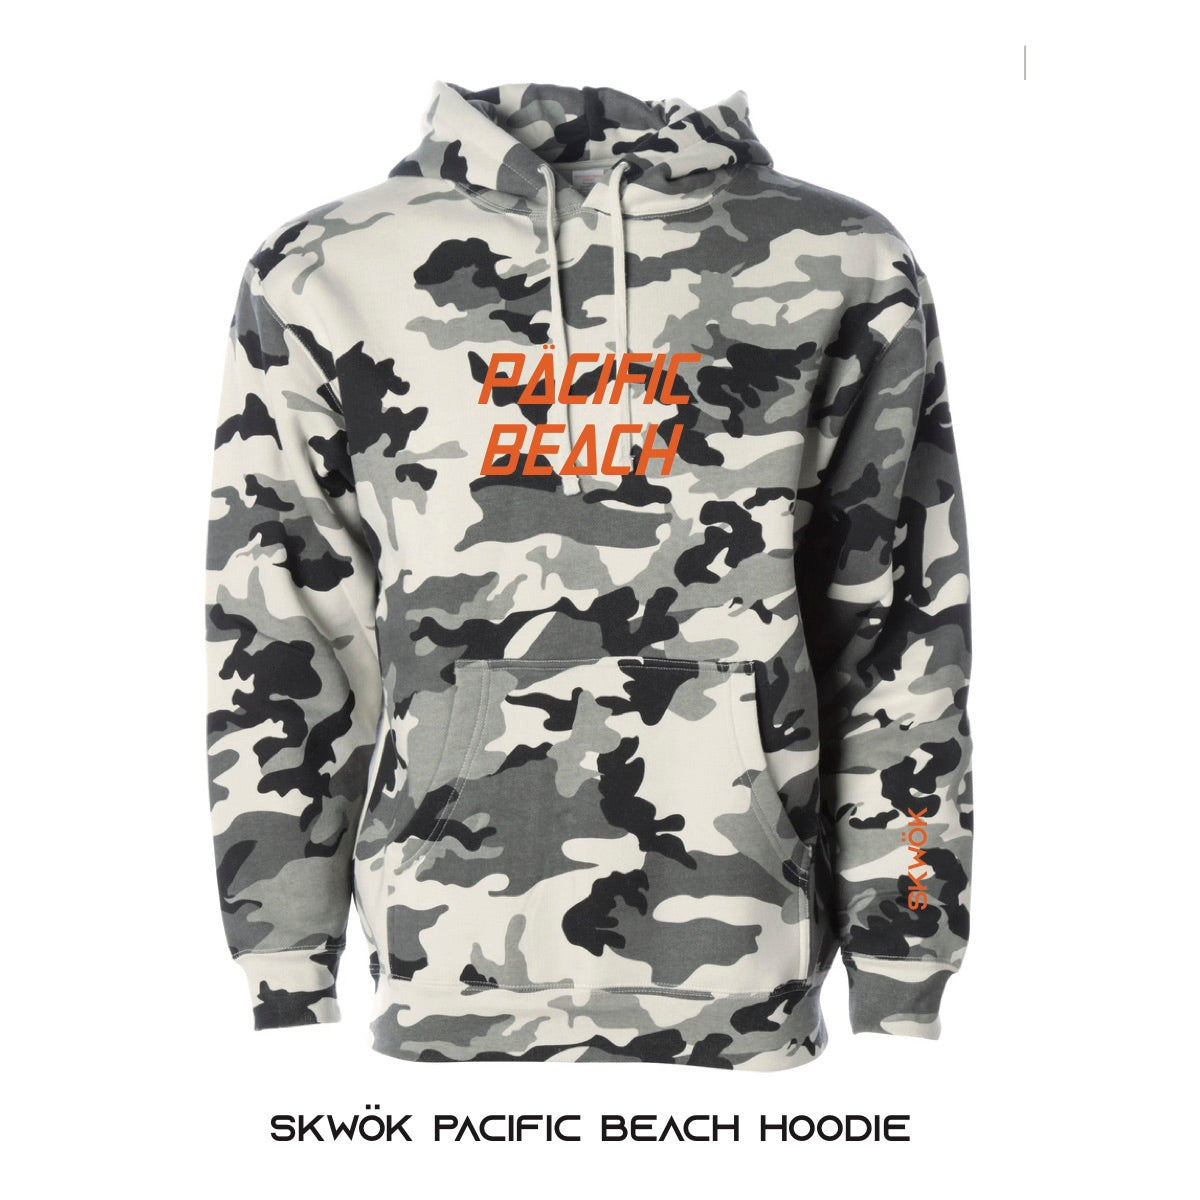 Skwok Pacific Beach Hoodie - Camouflage - 10oz - (6 Color Options)